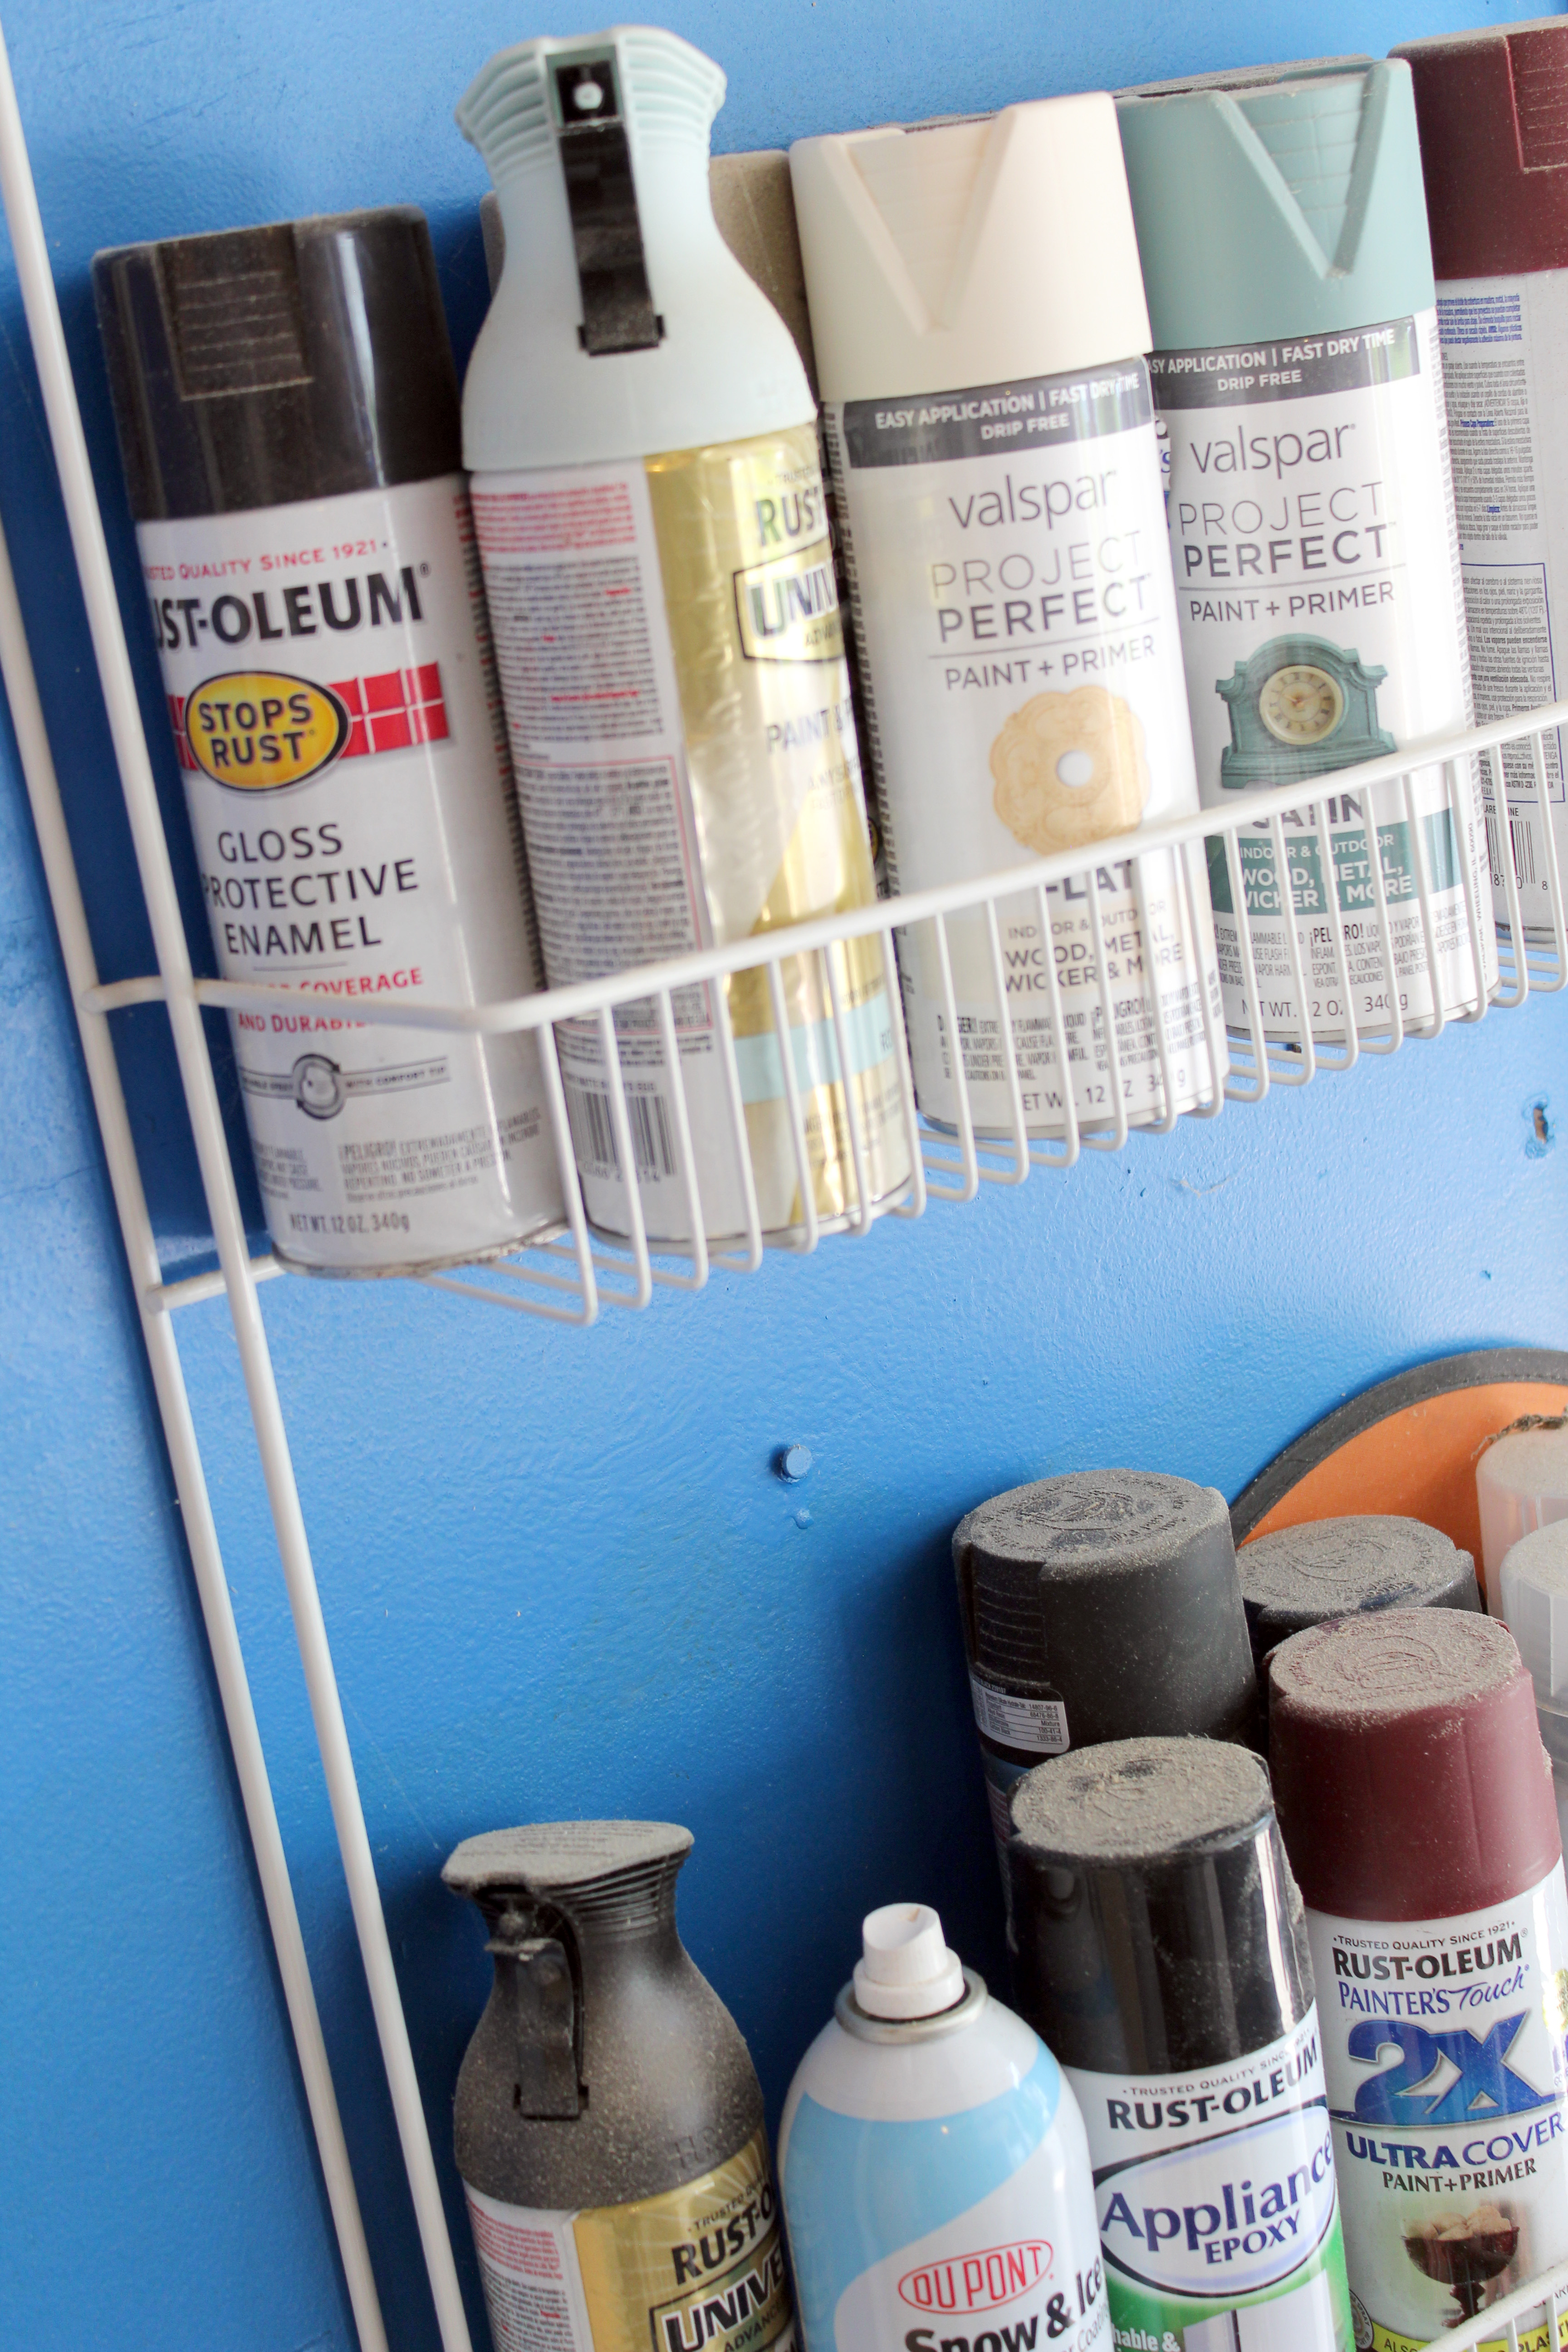 Upcycling a closet wire rack into spray paint organization in the garage